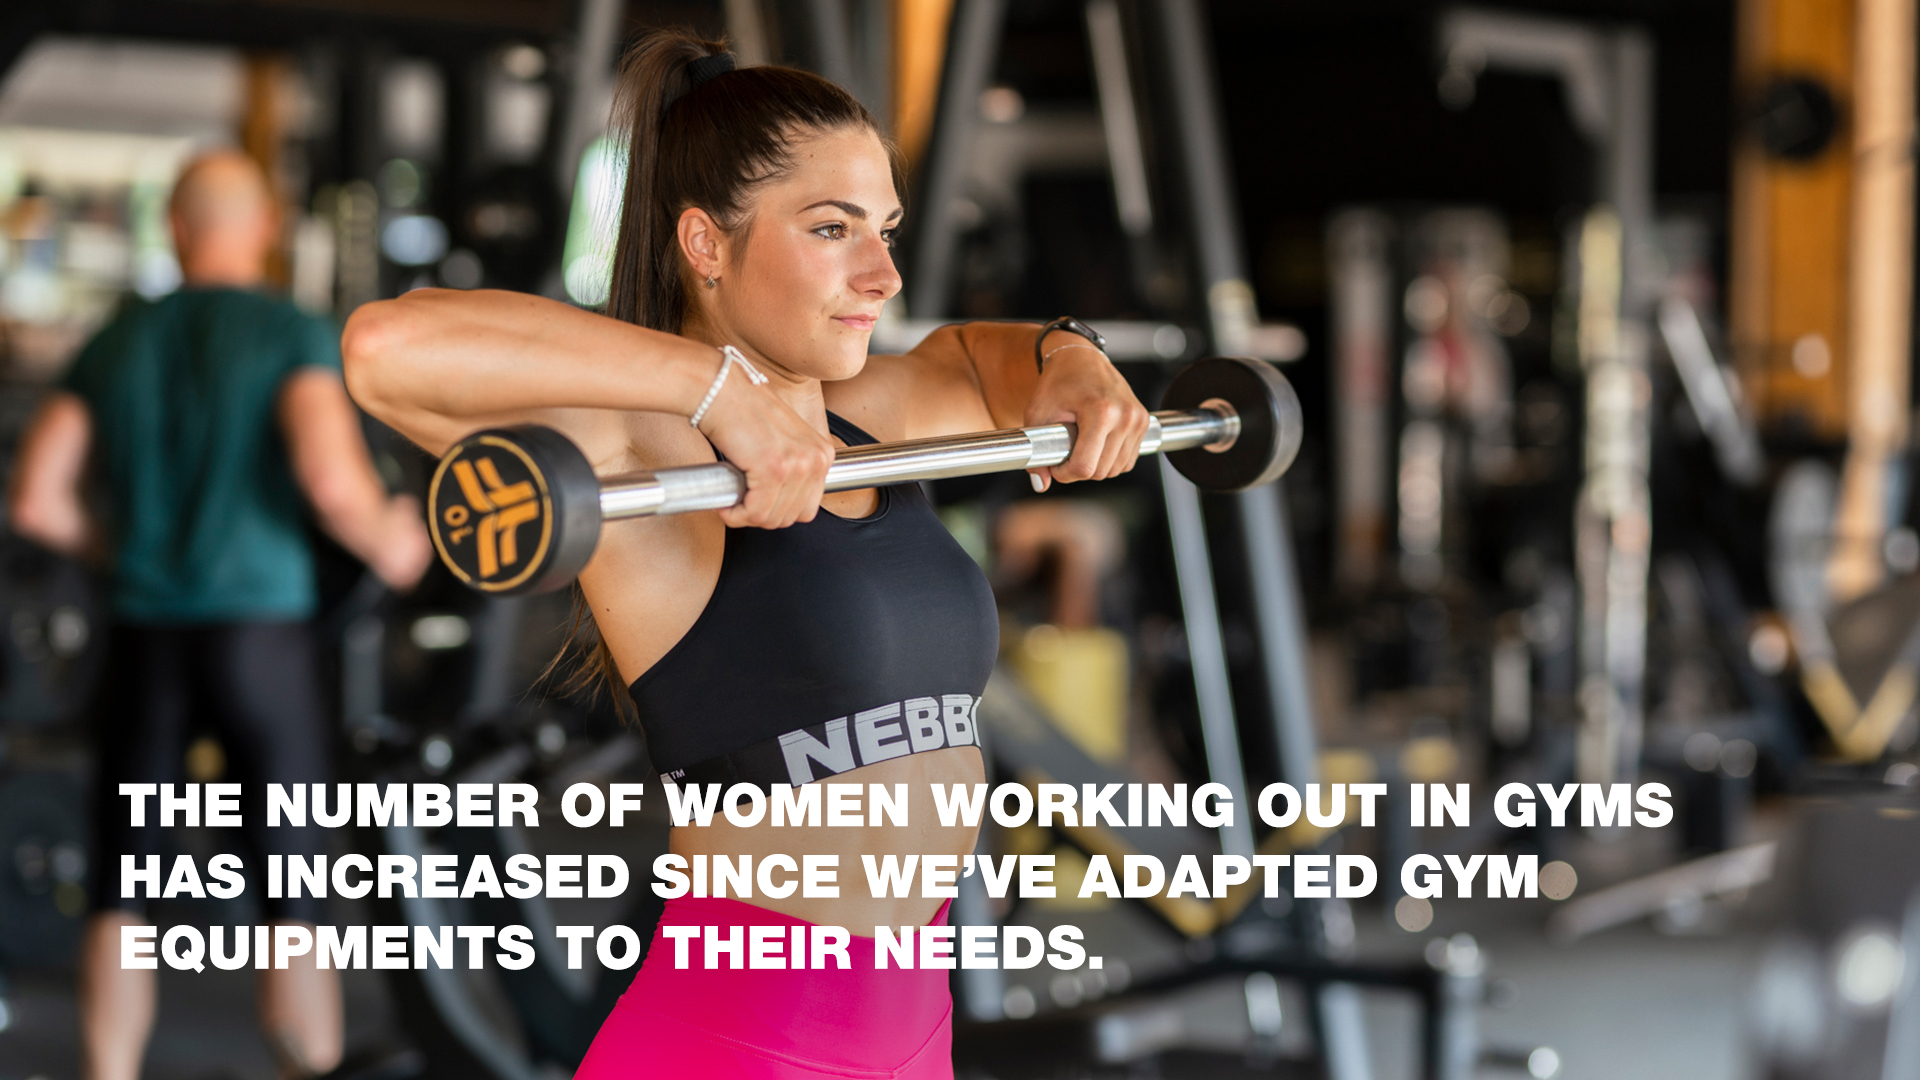 Fitness heroines who have influenced generations, NEBBIA